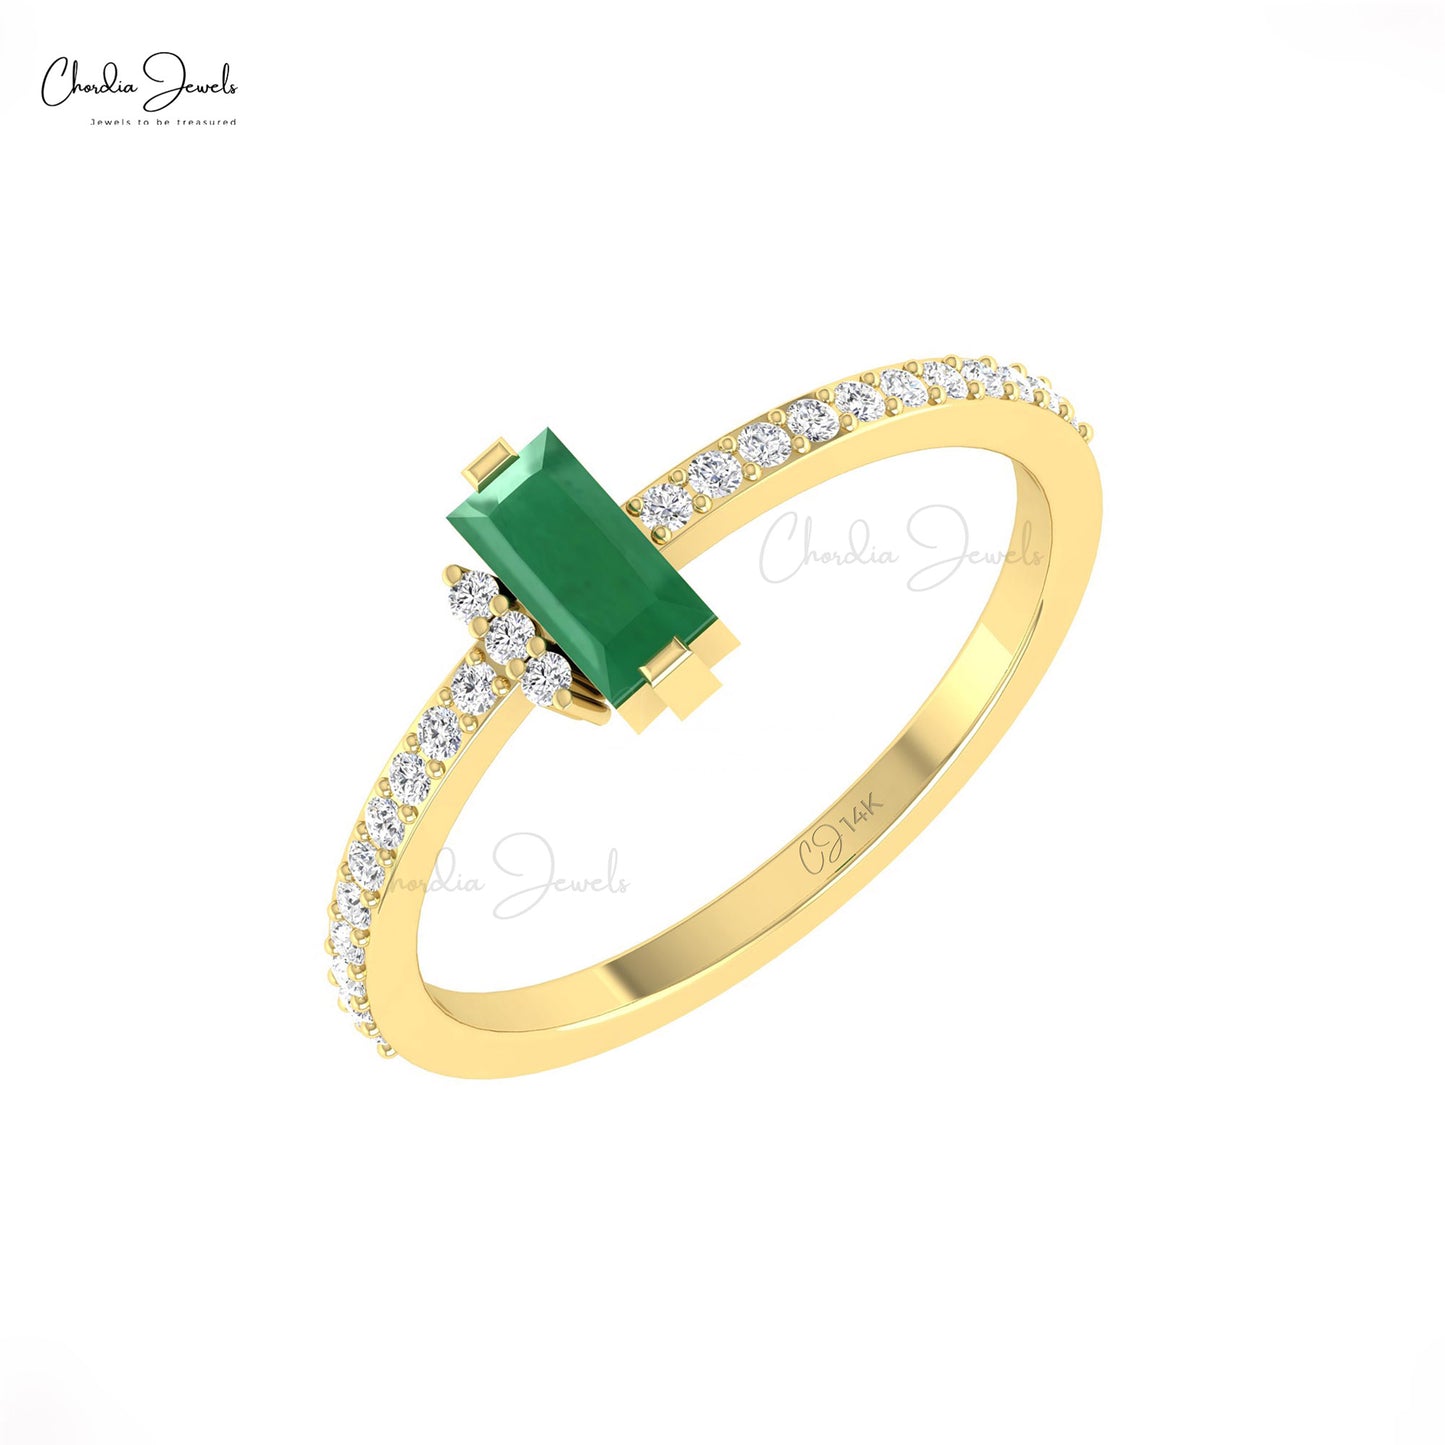 Step into elegance with our baguette emerald ring.